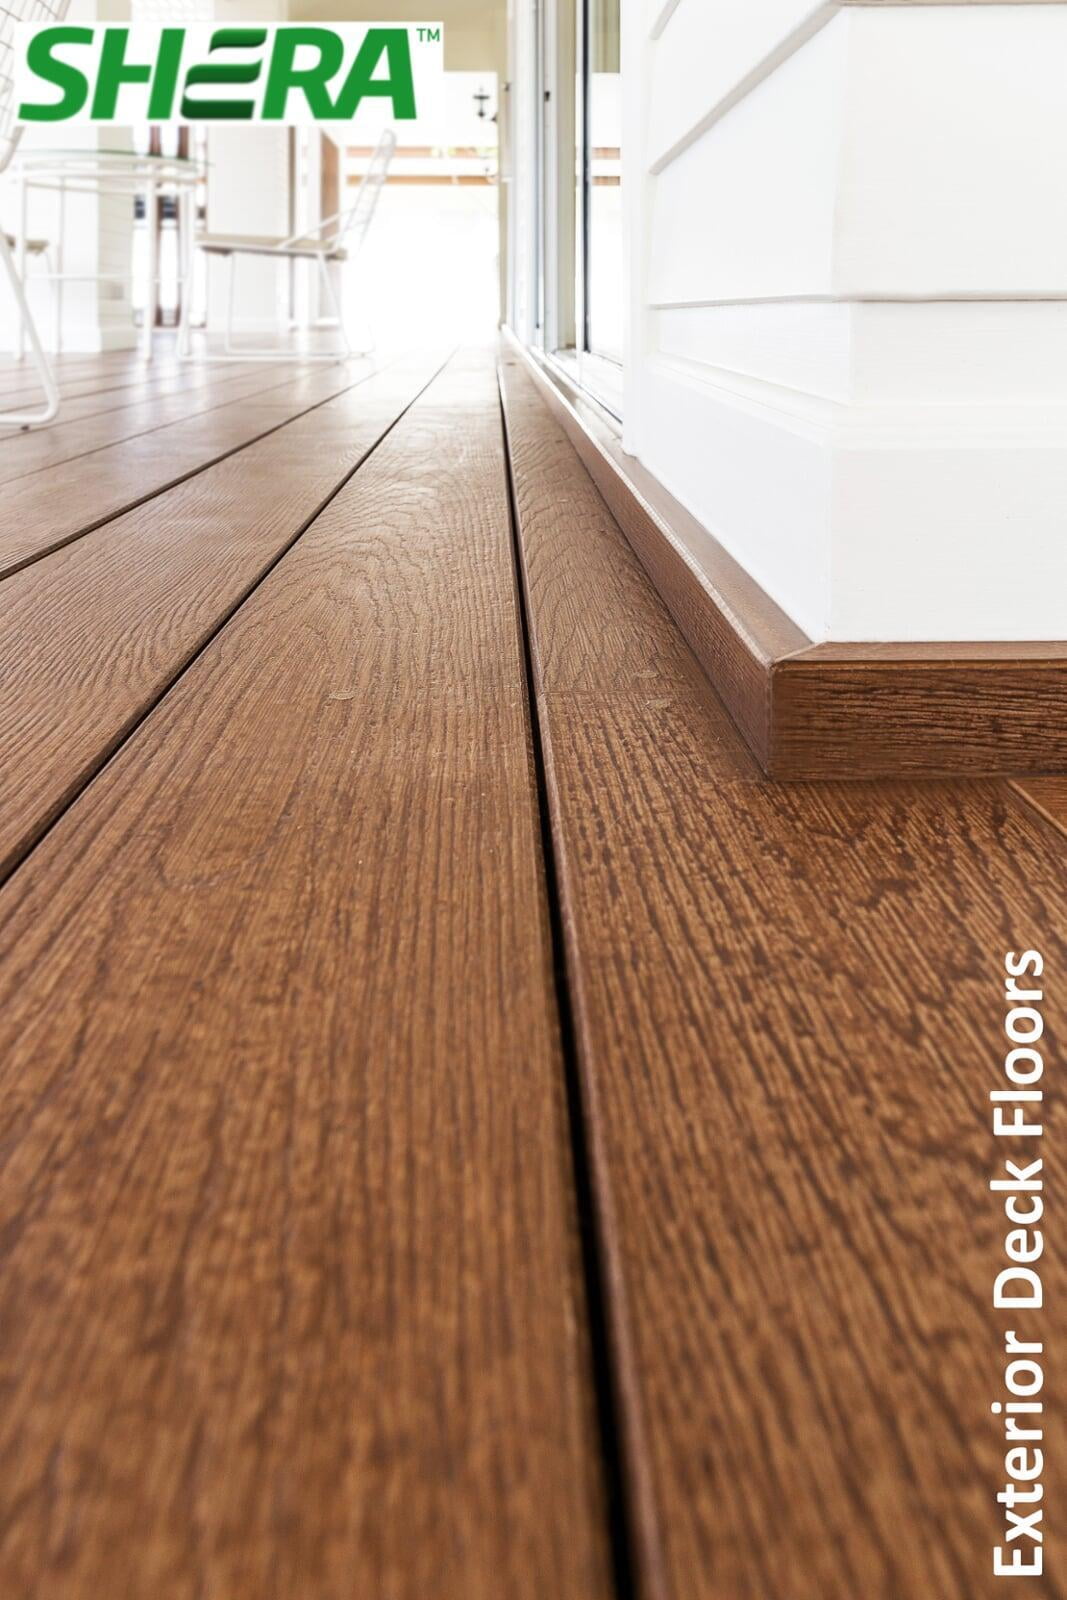 SHERA decking planks - high quality fibre cement planks for exterior decking applications